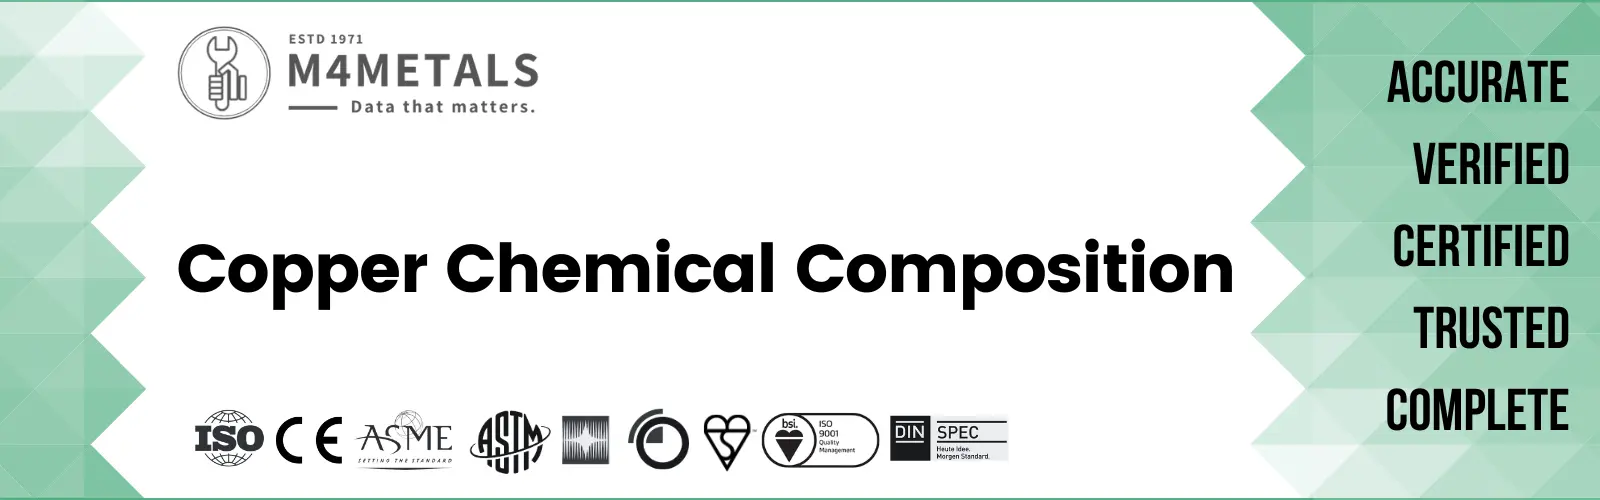 Copper Chemical Composition